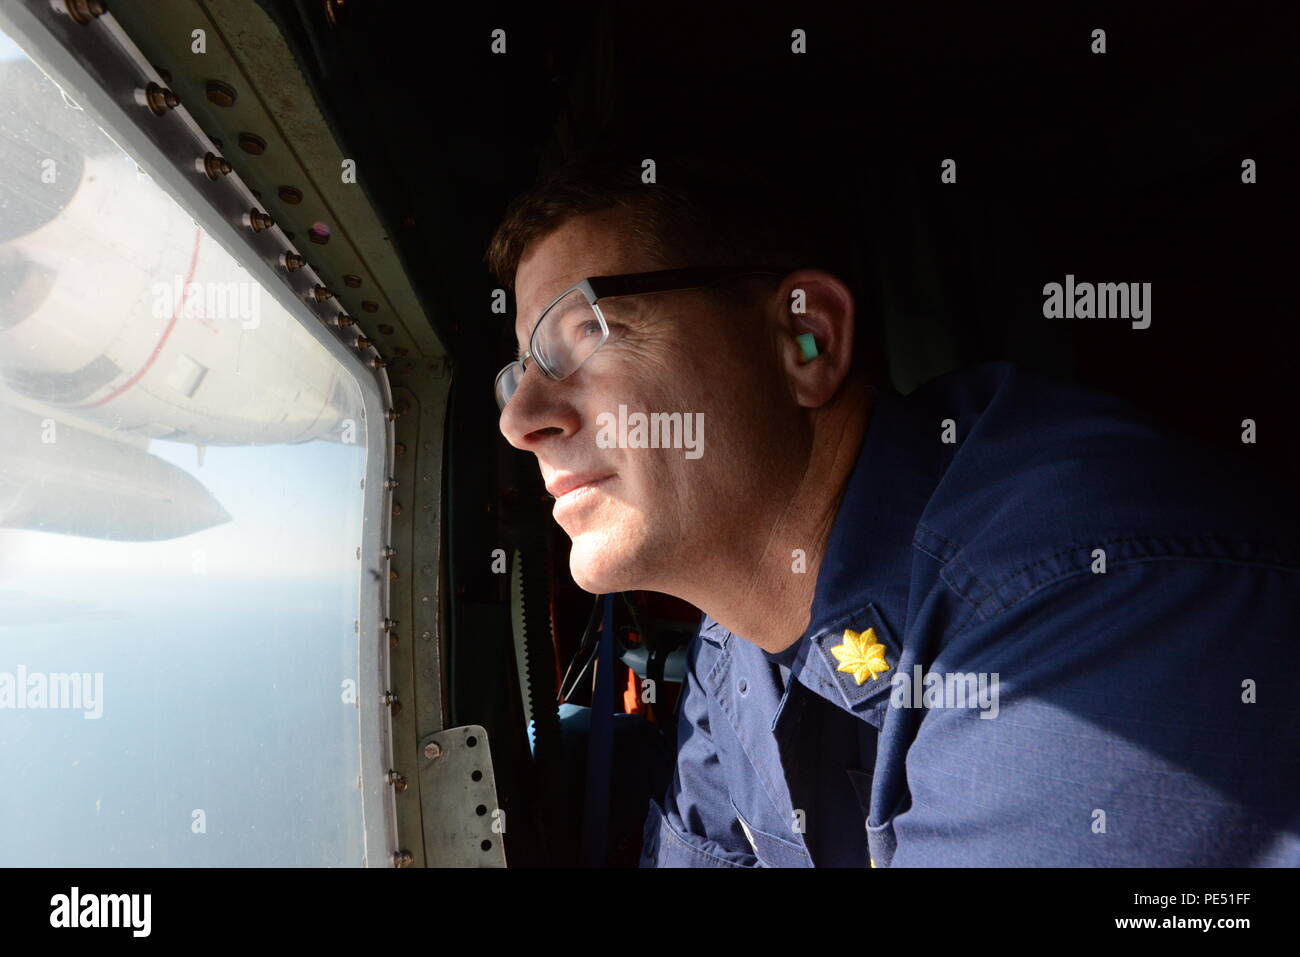 Lt. Cmdr. Todd Boze peers out of a window of an HC-130 Hercules aircraft during a fisheries surveillance flight of the Pacific Northwest, Sept. 30, 2015. During the flight, the crew identified and documented 32 commercial fishing vessels in support of the Coast Guard's Living Marine Resources mission and partner agencies. (U.S. Coast Guard photo by Seaman Sarah Wilson) Stock Photo